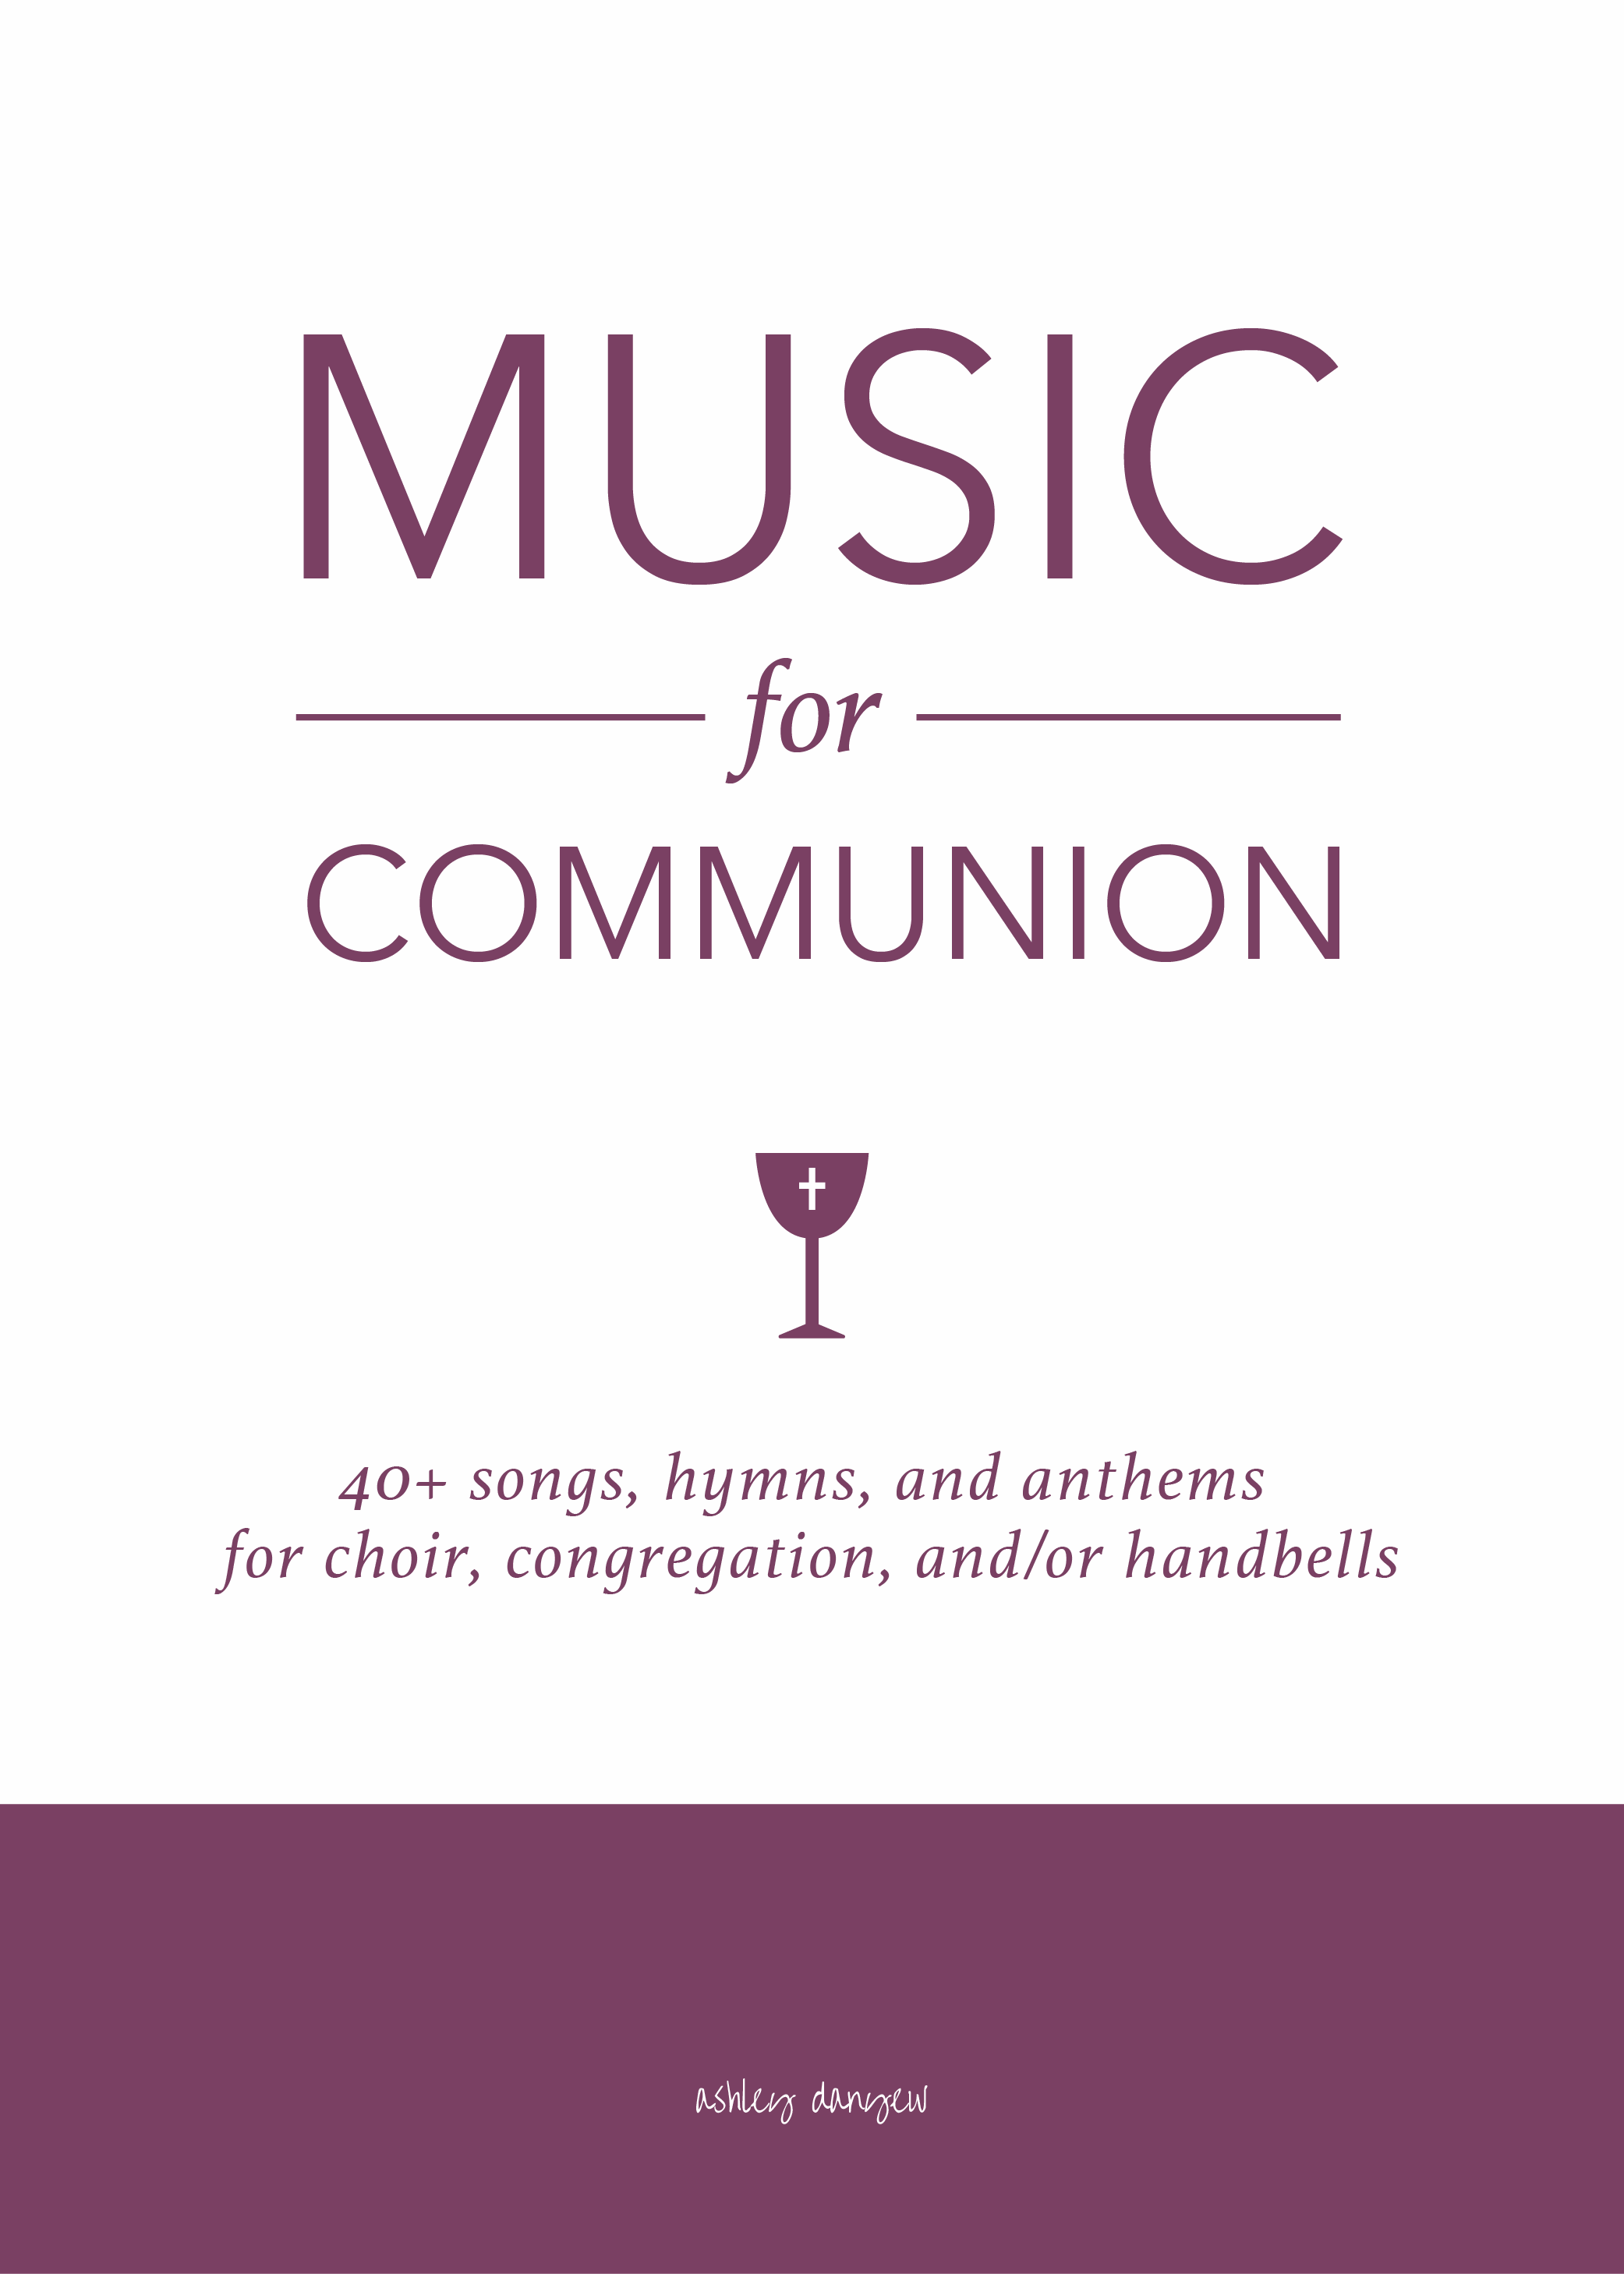 Copy of Music for Communion: 40+ Songs, Hymns, and Anthems